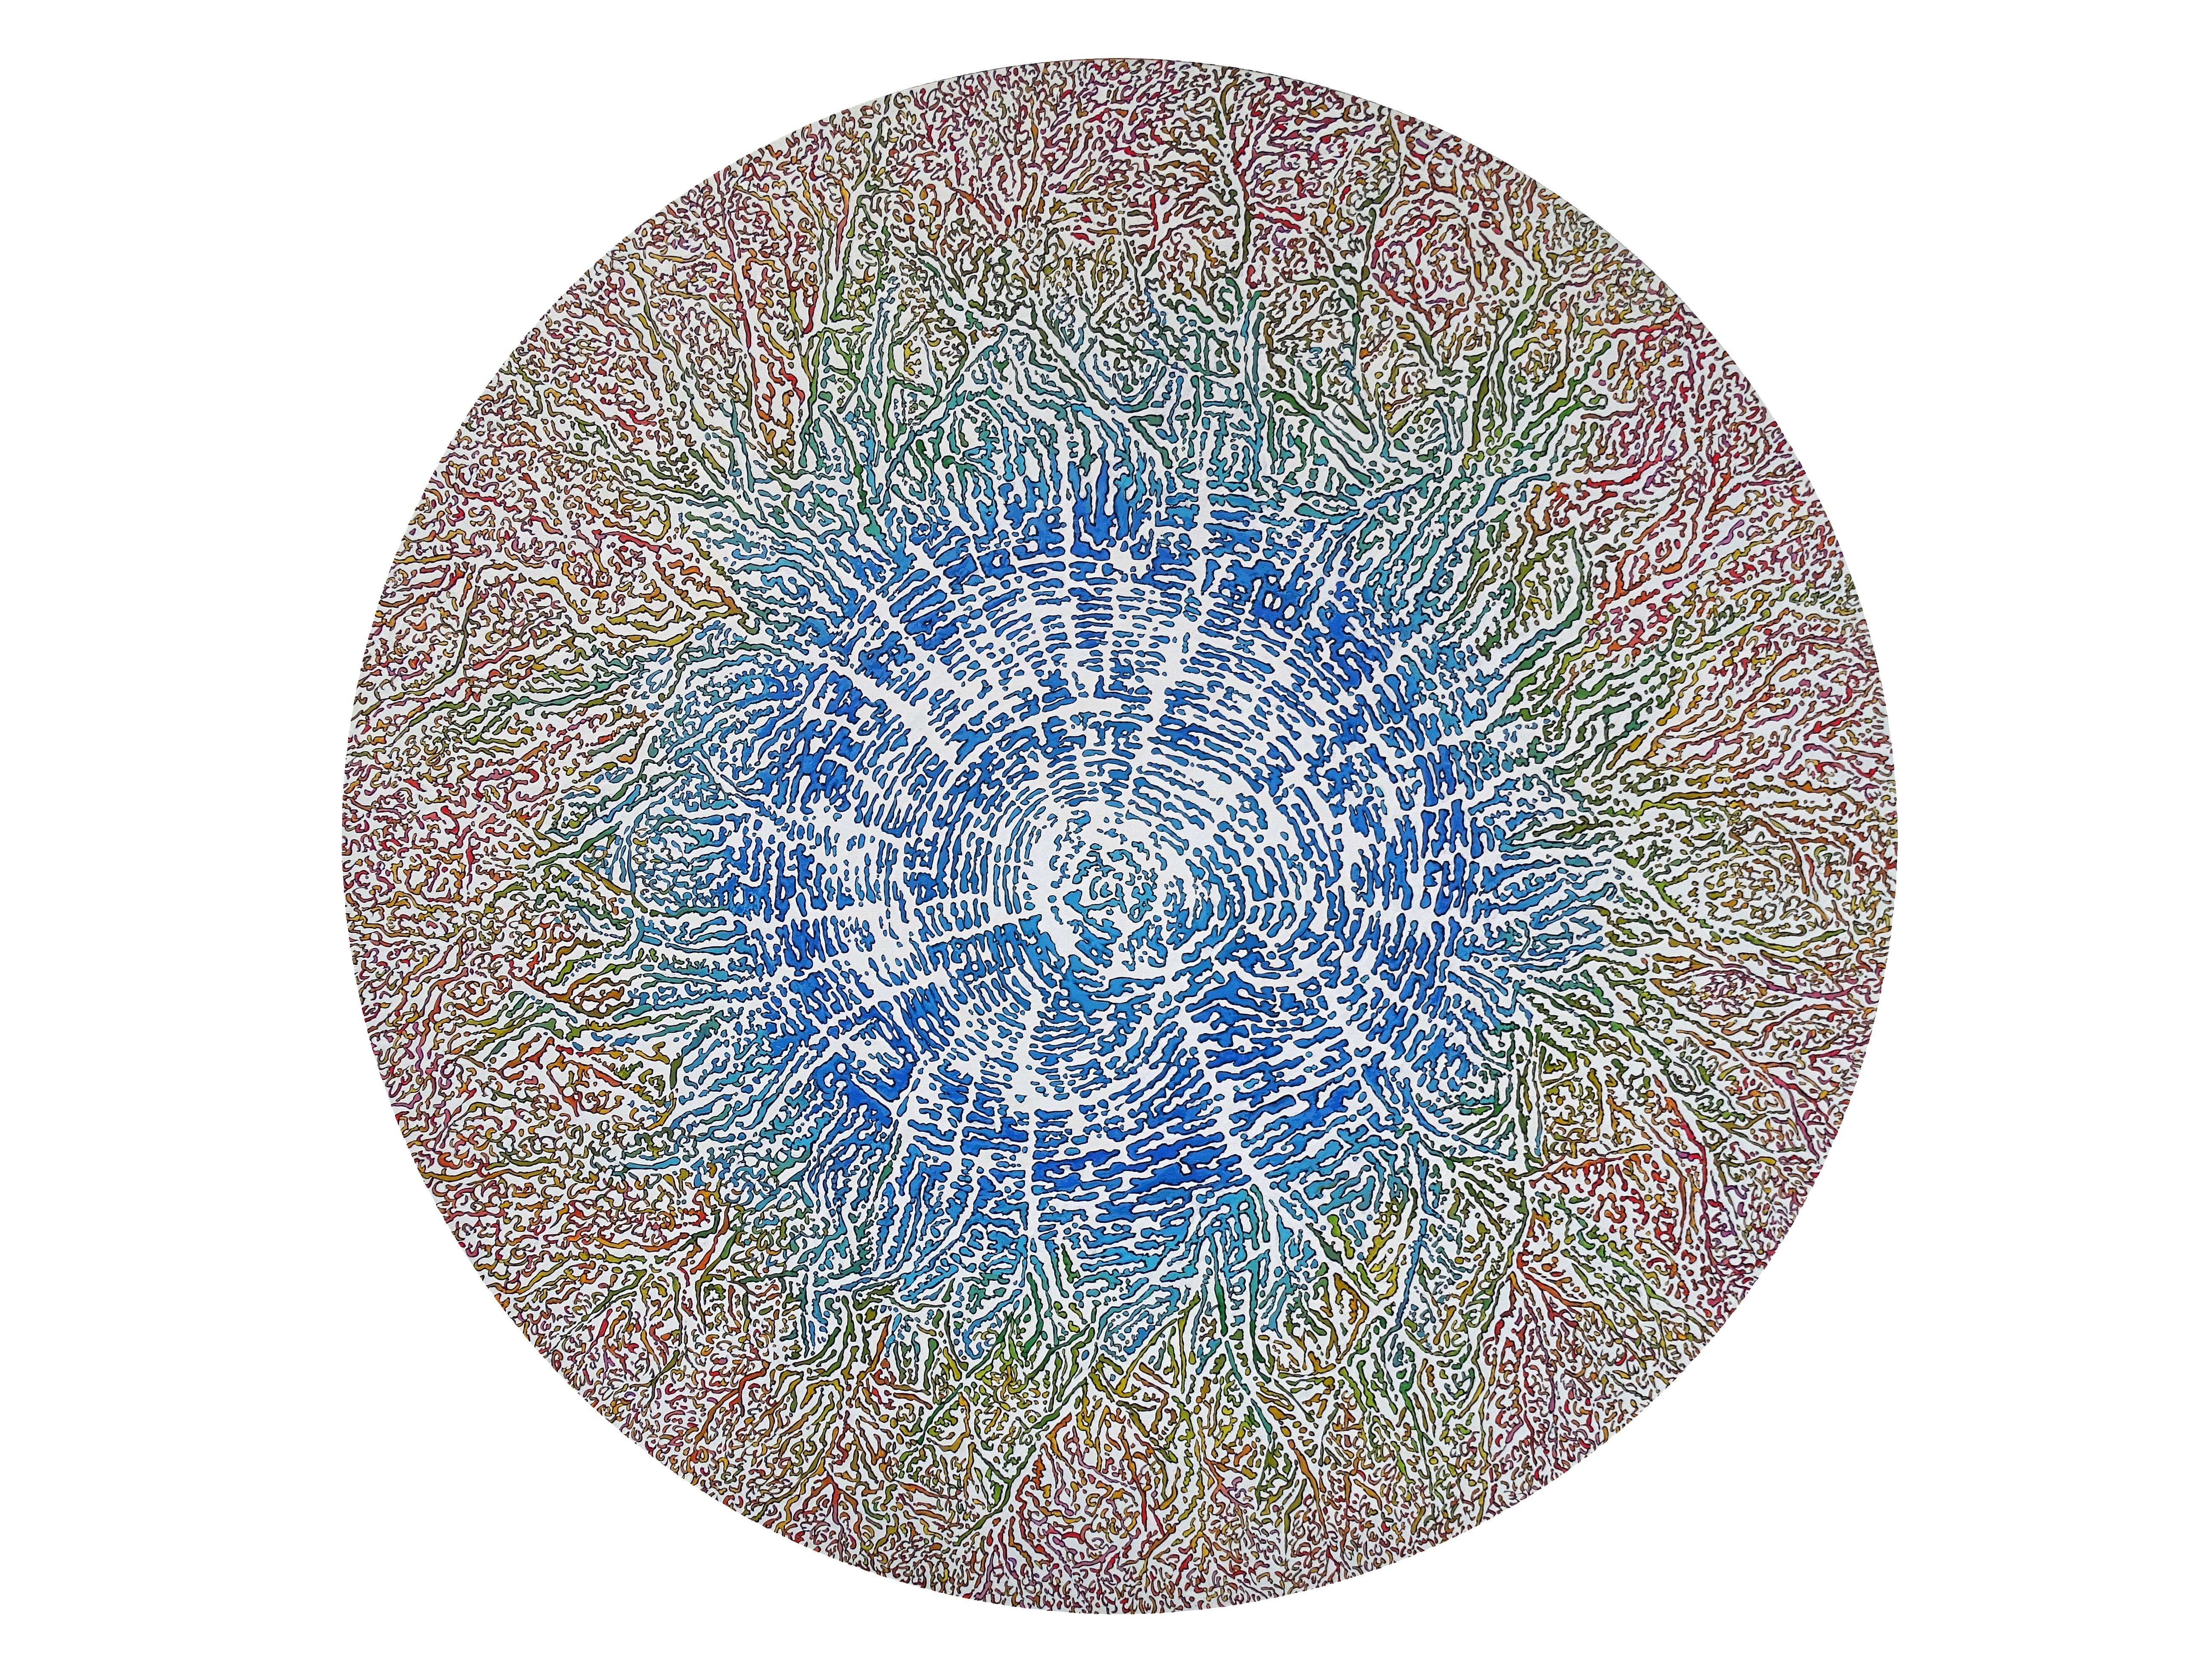 "Growing", Blue Concentric to Red Radial Ways Circular Abstract Acrylic Painting